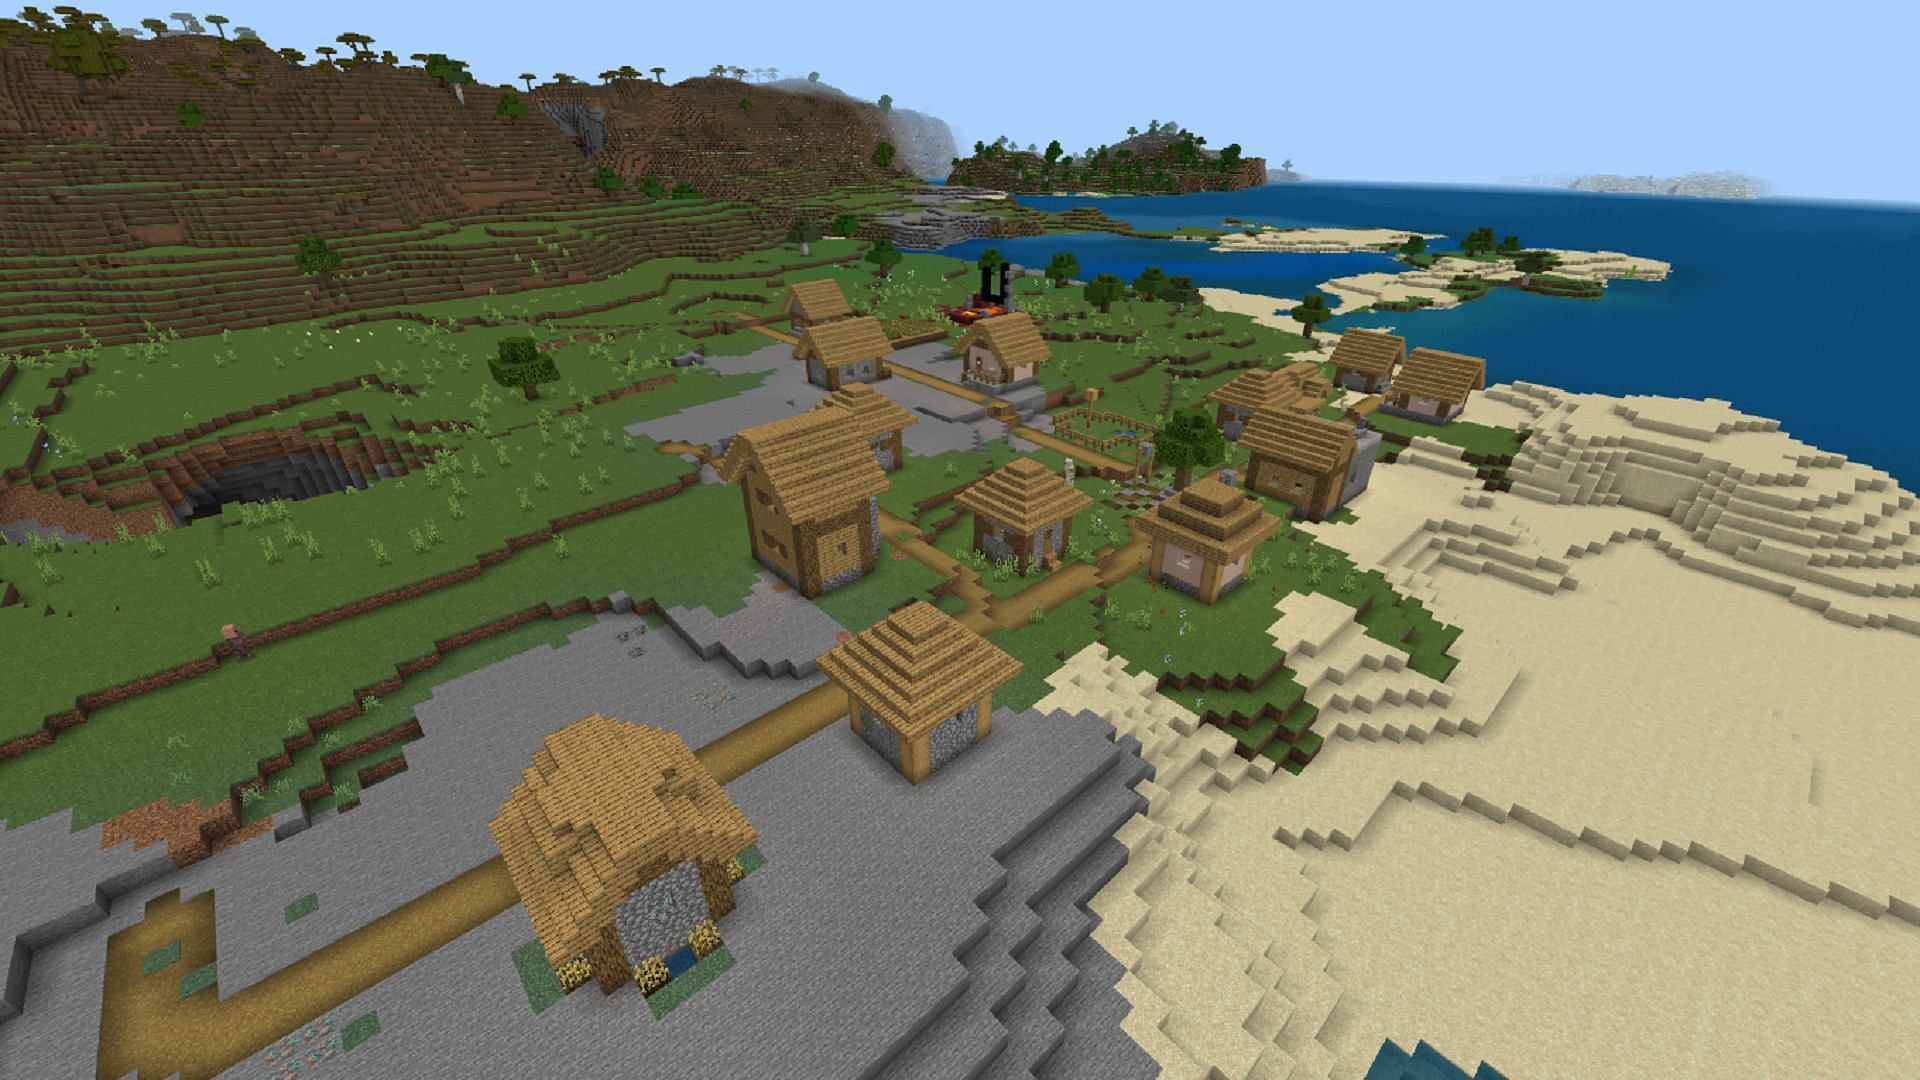 This Minecraft Bedrock seed&#039;s spawn village has a lot going on underneath its surface (Image via Mojang)